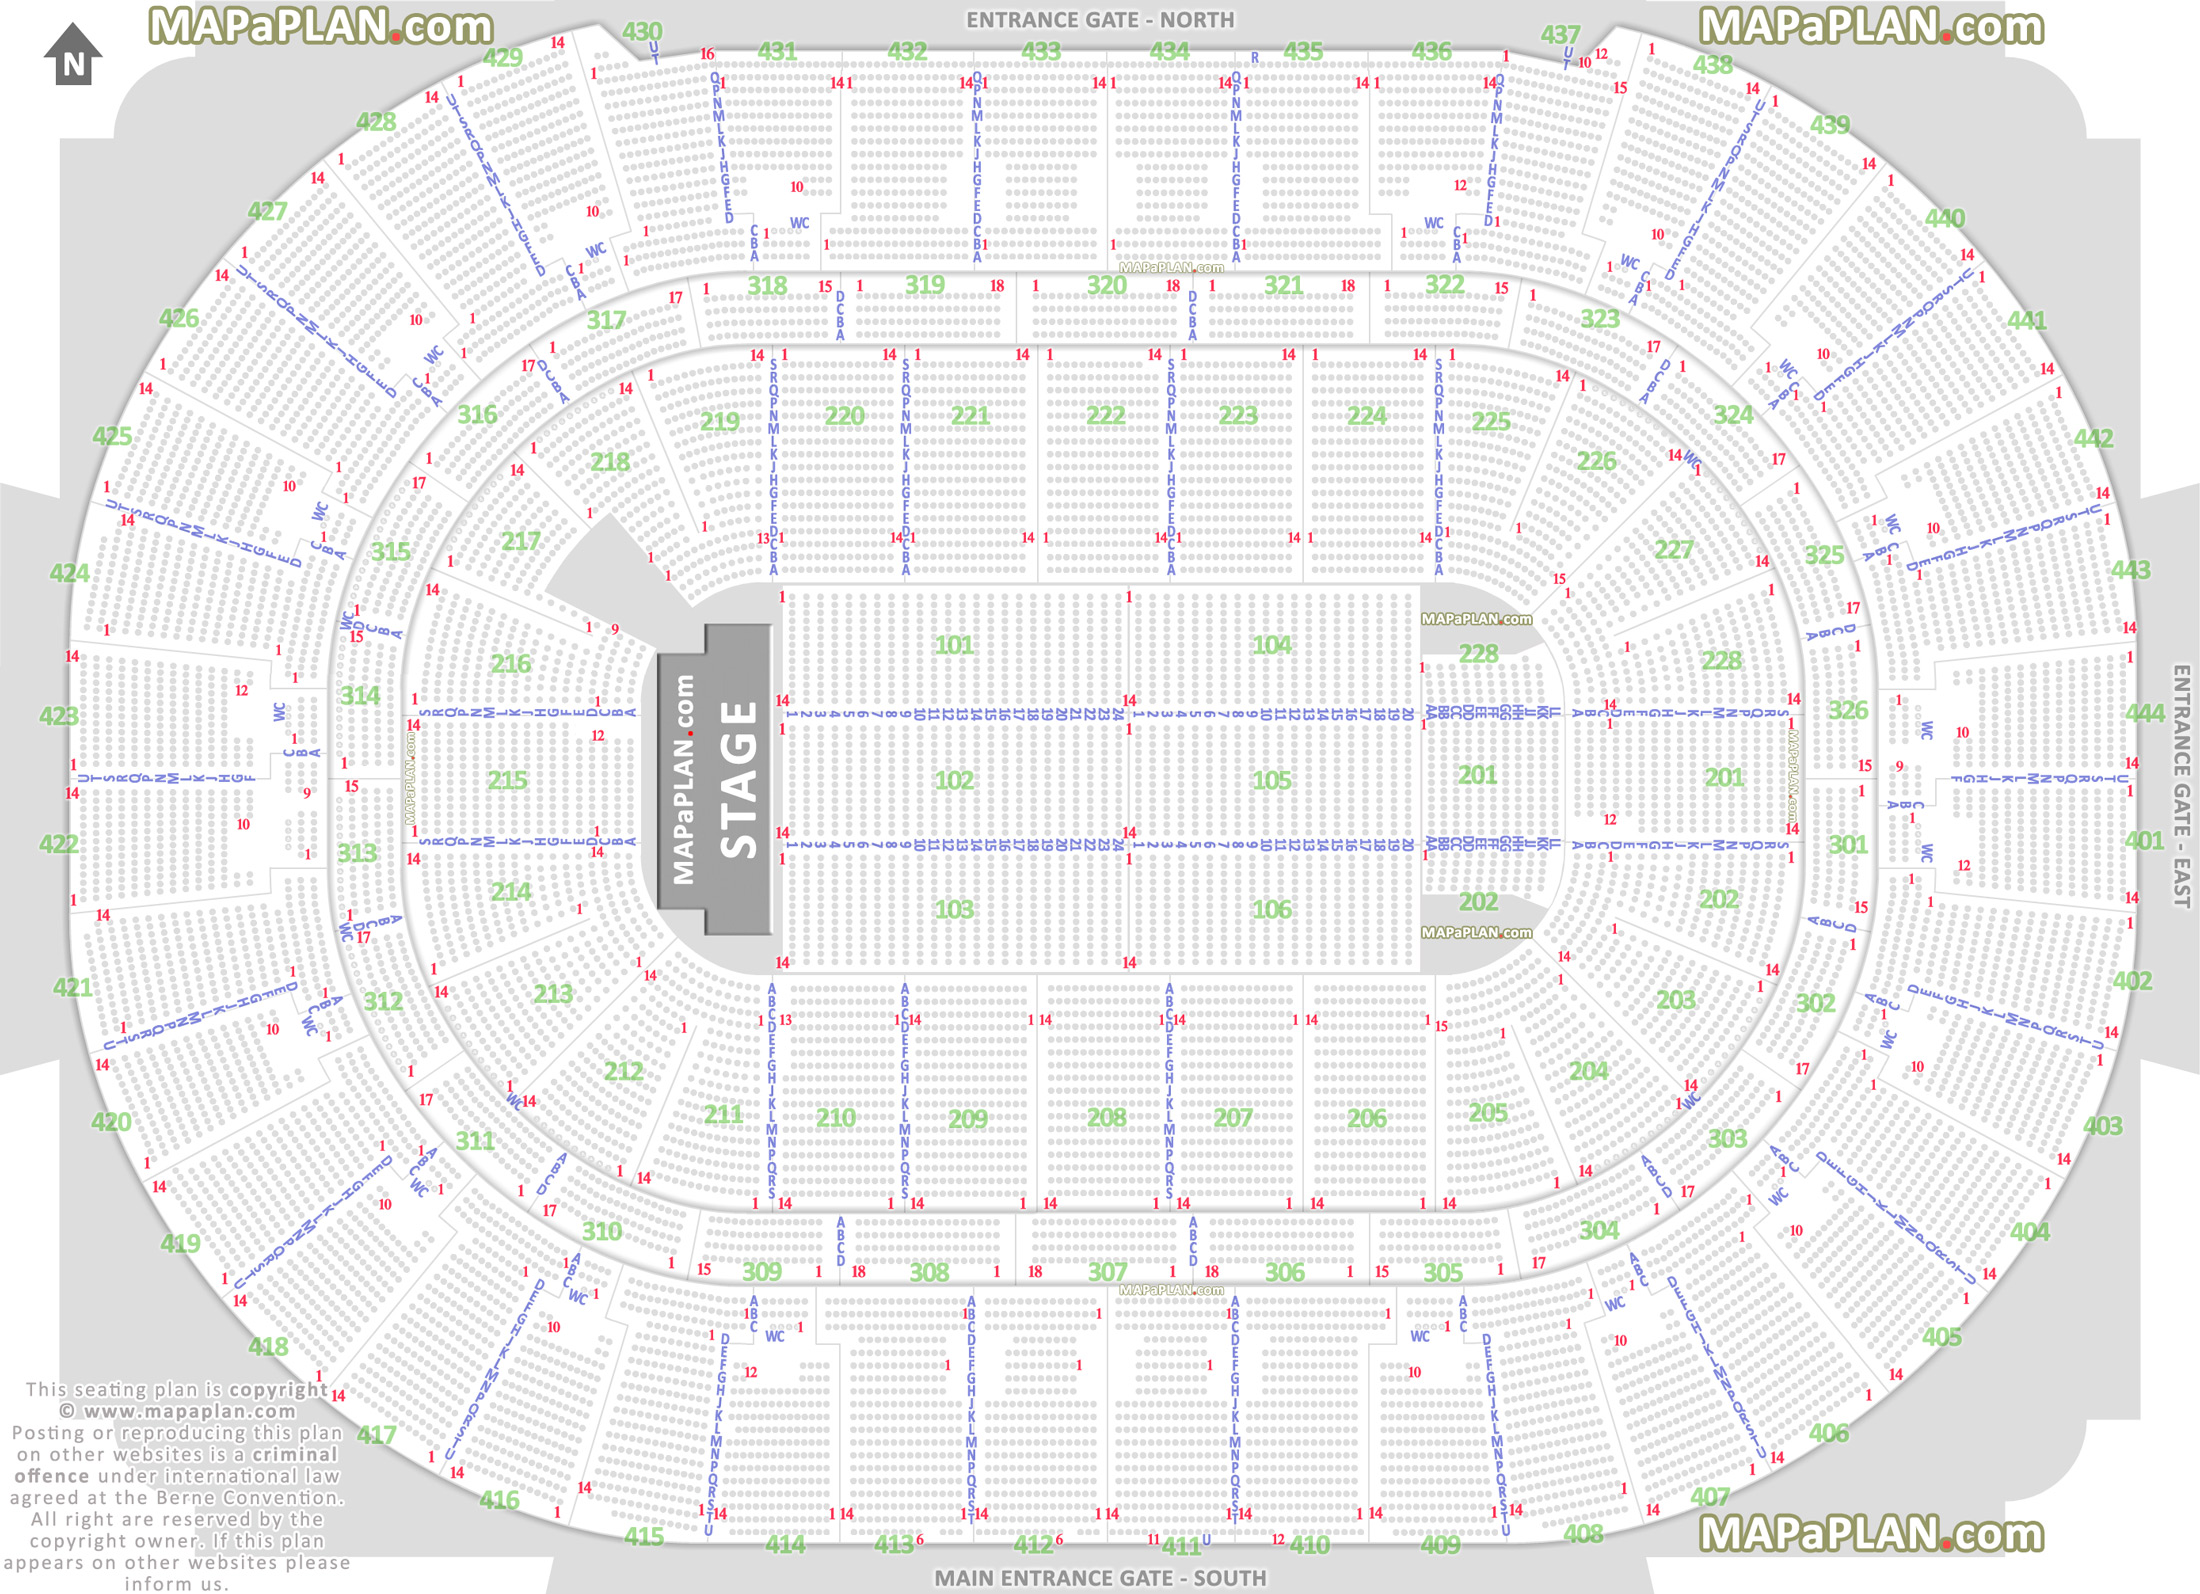 Honda Center - Detailed seat & row numbers end stage concert ...